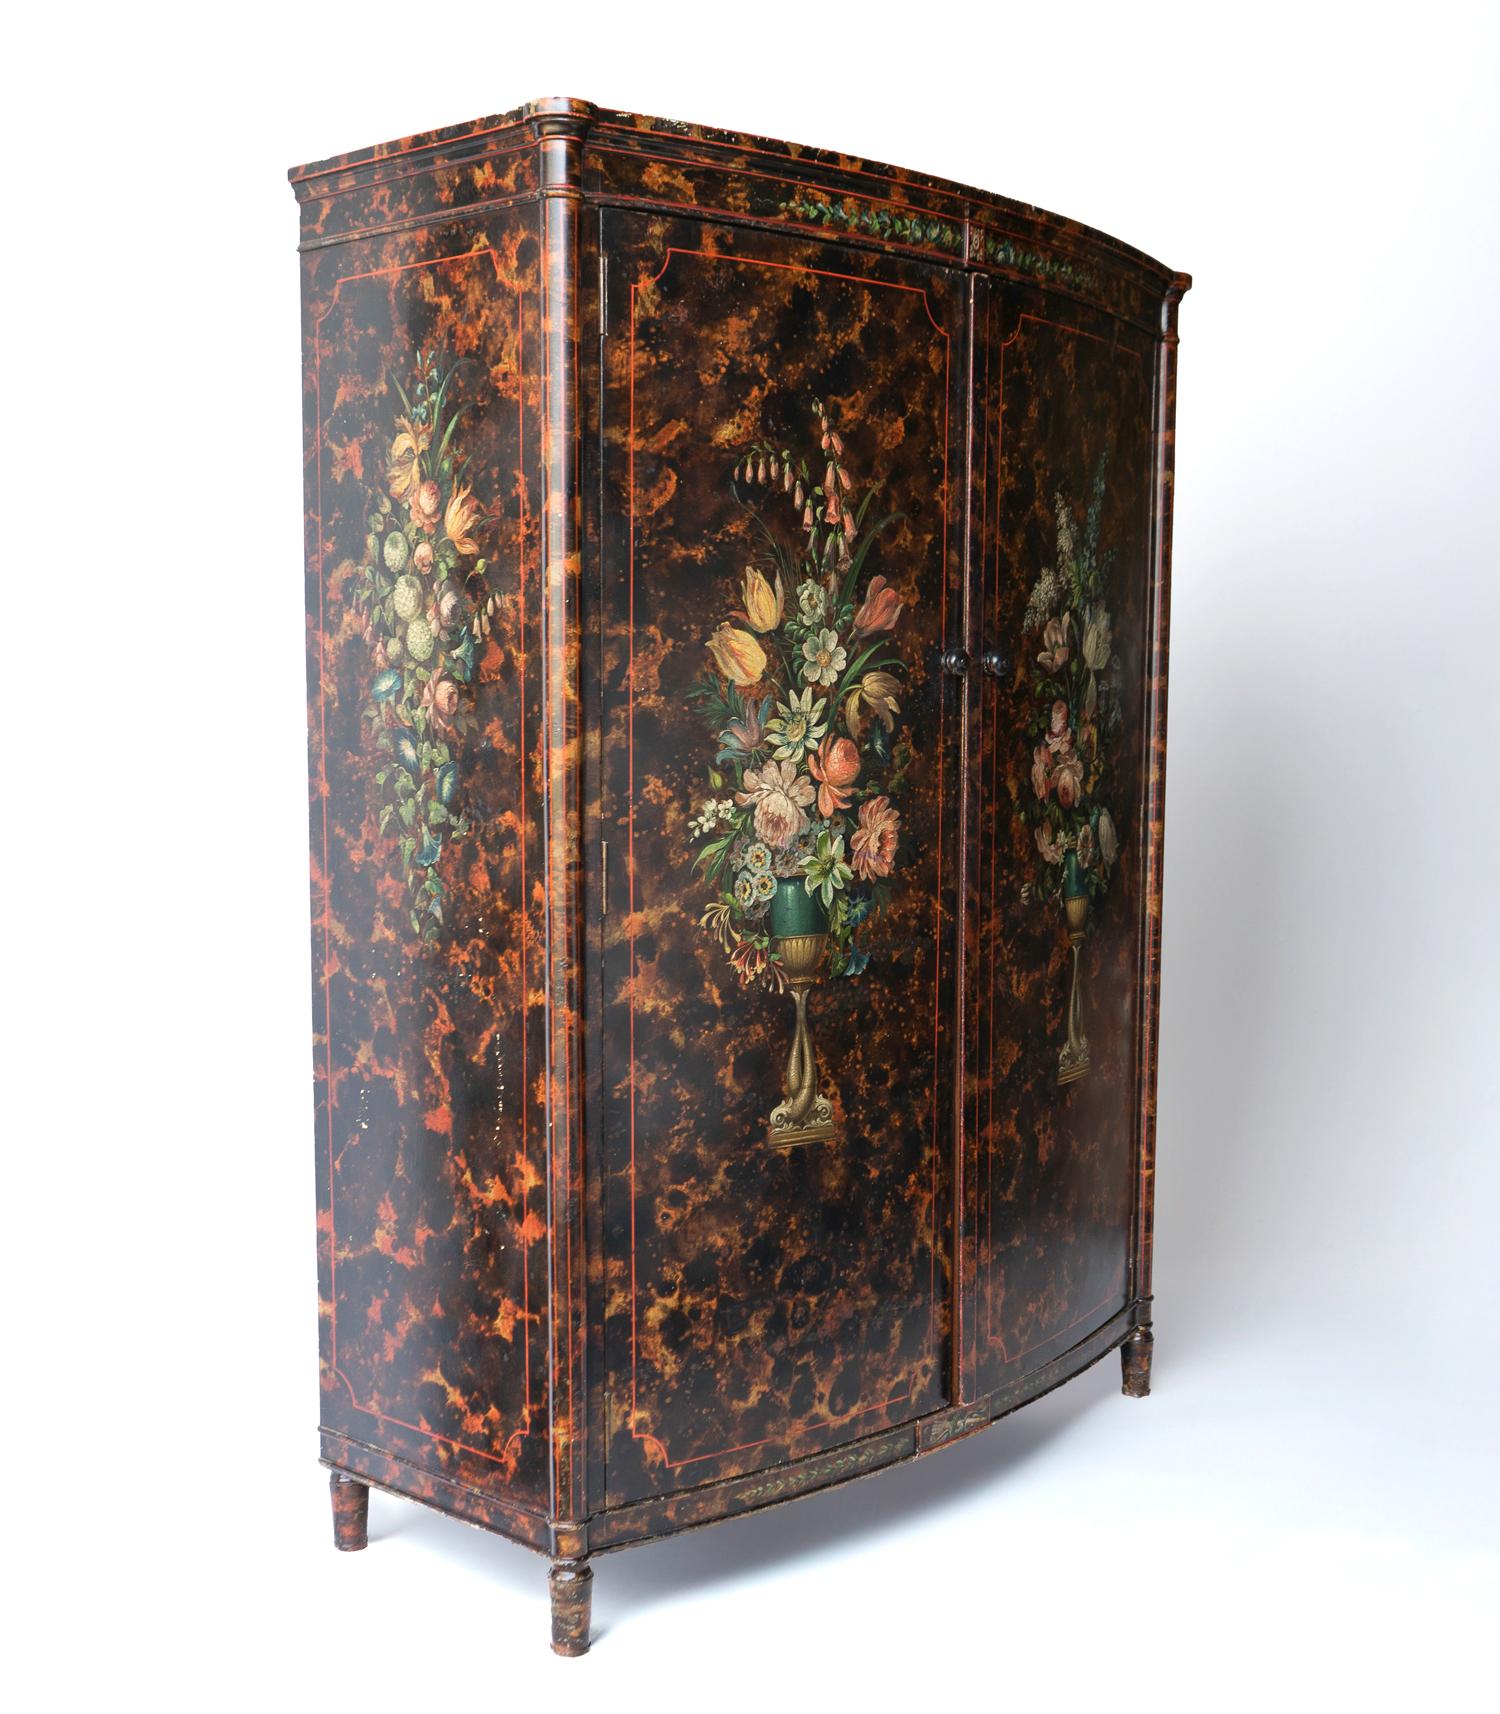 Hand-Painted Antique Venetian Faux Tortoiseshell And Floral Painted Wardrobe